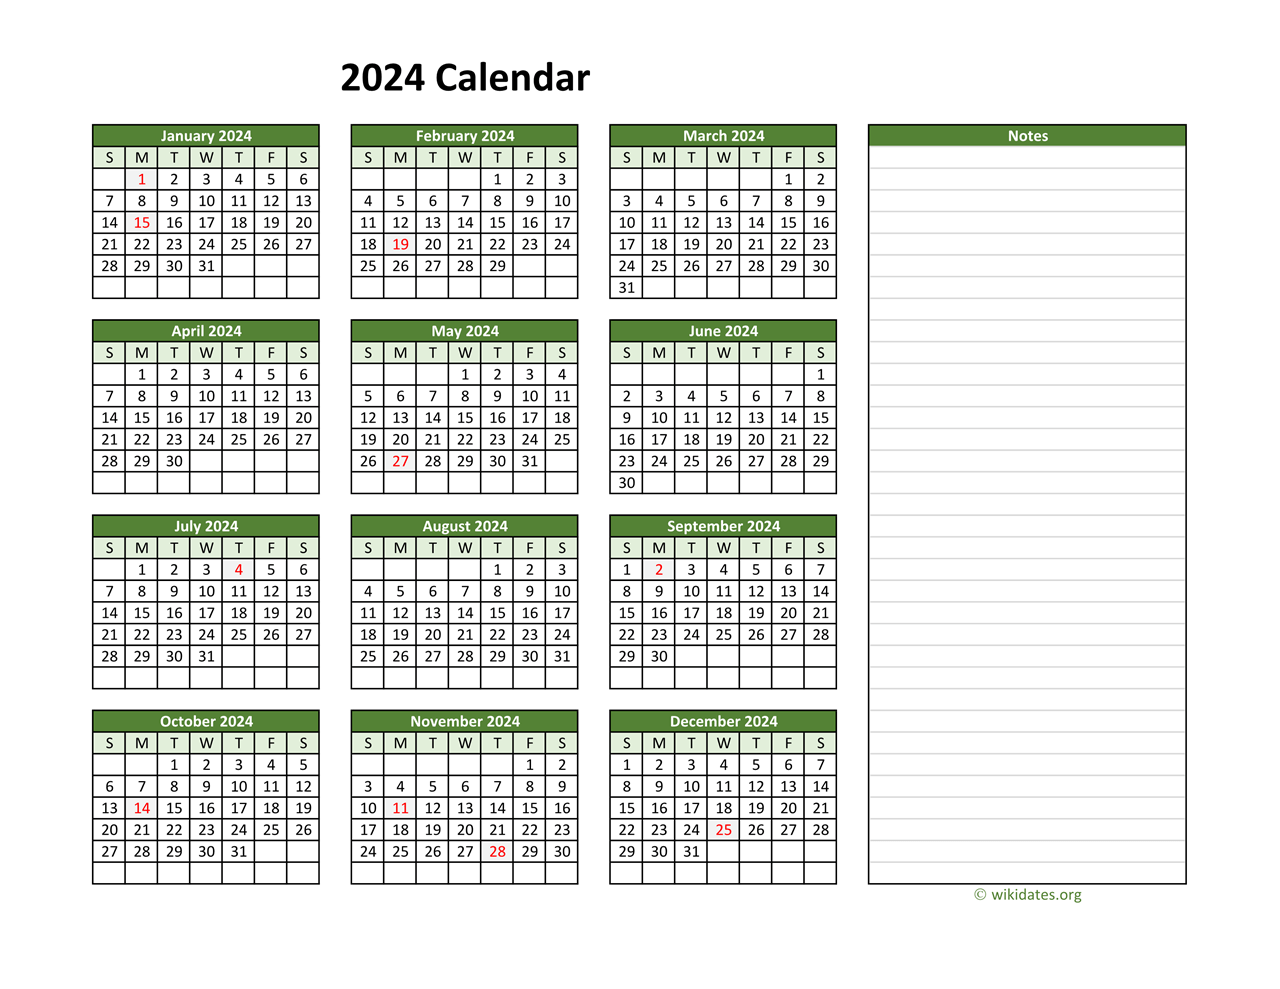 Yearly Printable 2024 Calendar With Notes | Wikidates for Printable Calendar With Notes 2024